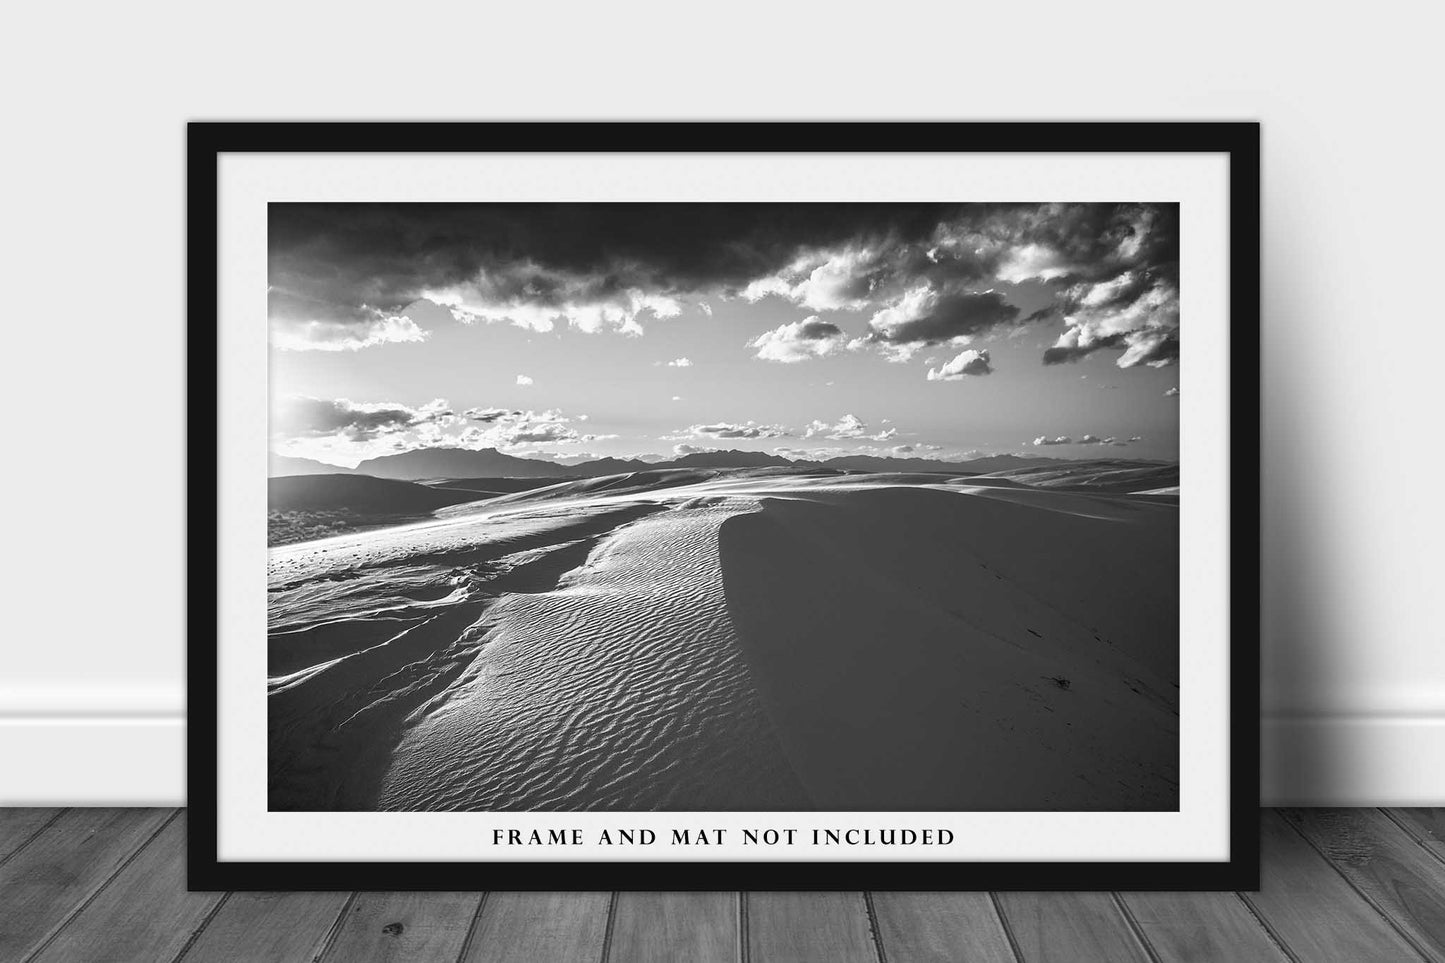 White Sands National Park Photography Print (Not Framed) Black and White Picture of Sand Dunes with Shadows in New Mexico Desert Wall Art Southwestern Decor